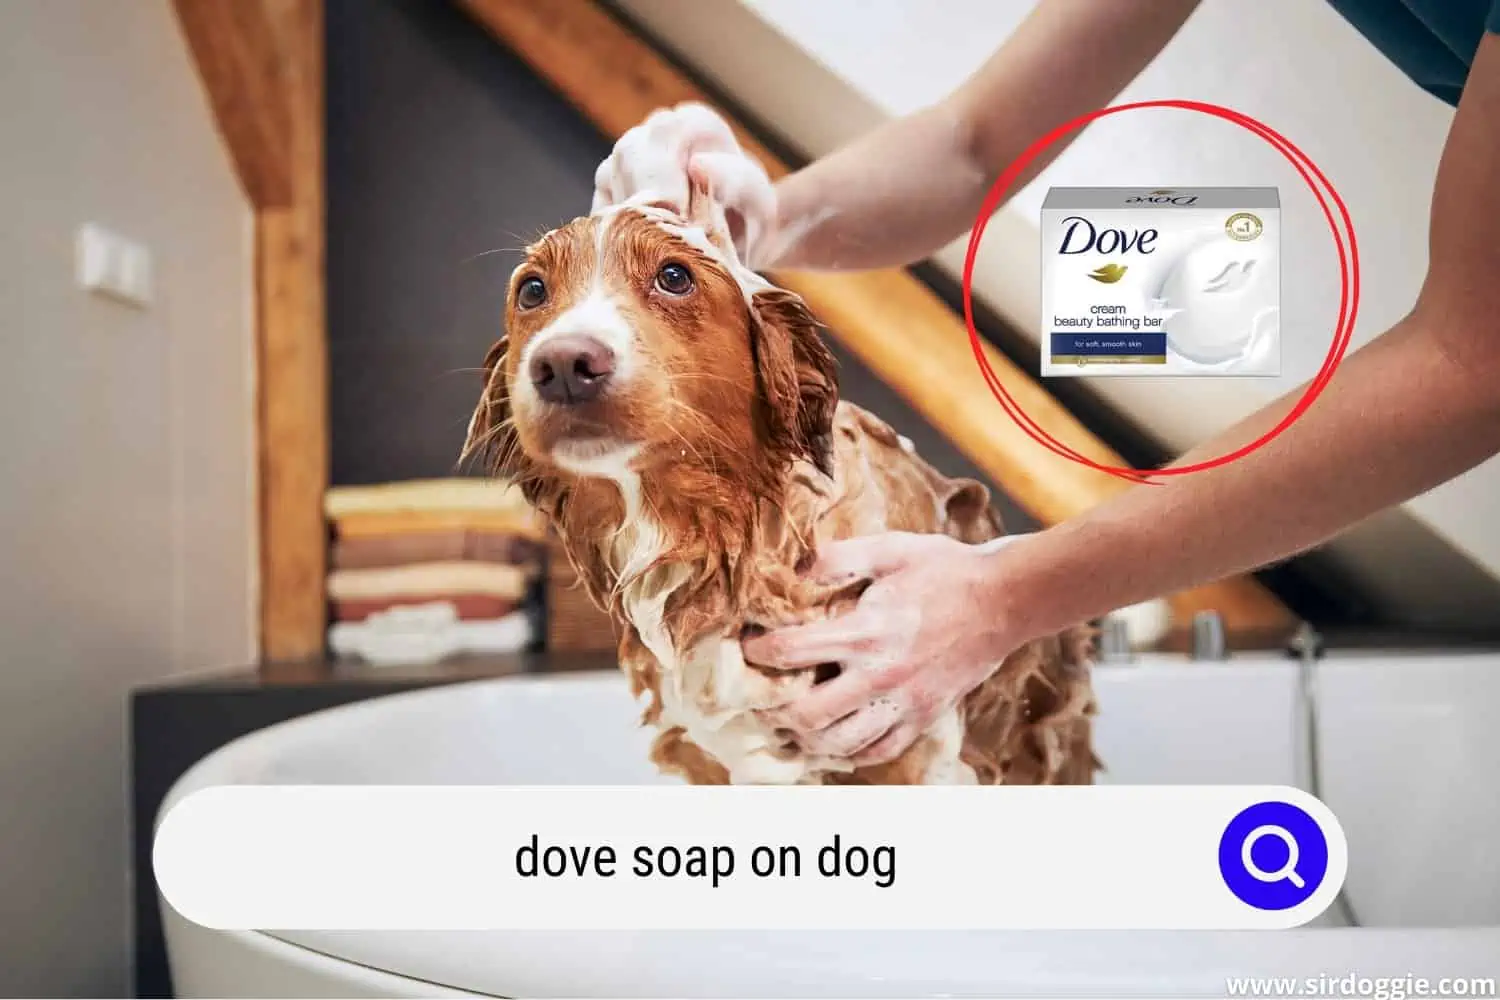 owner using dove soap in bathing dog